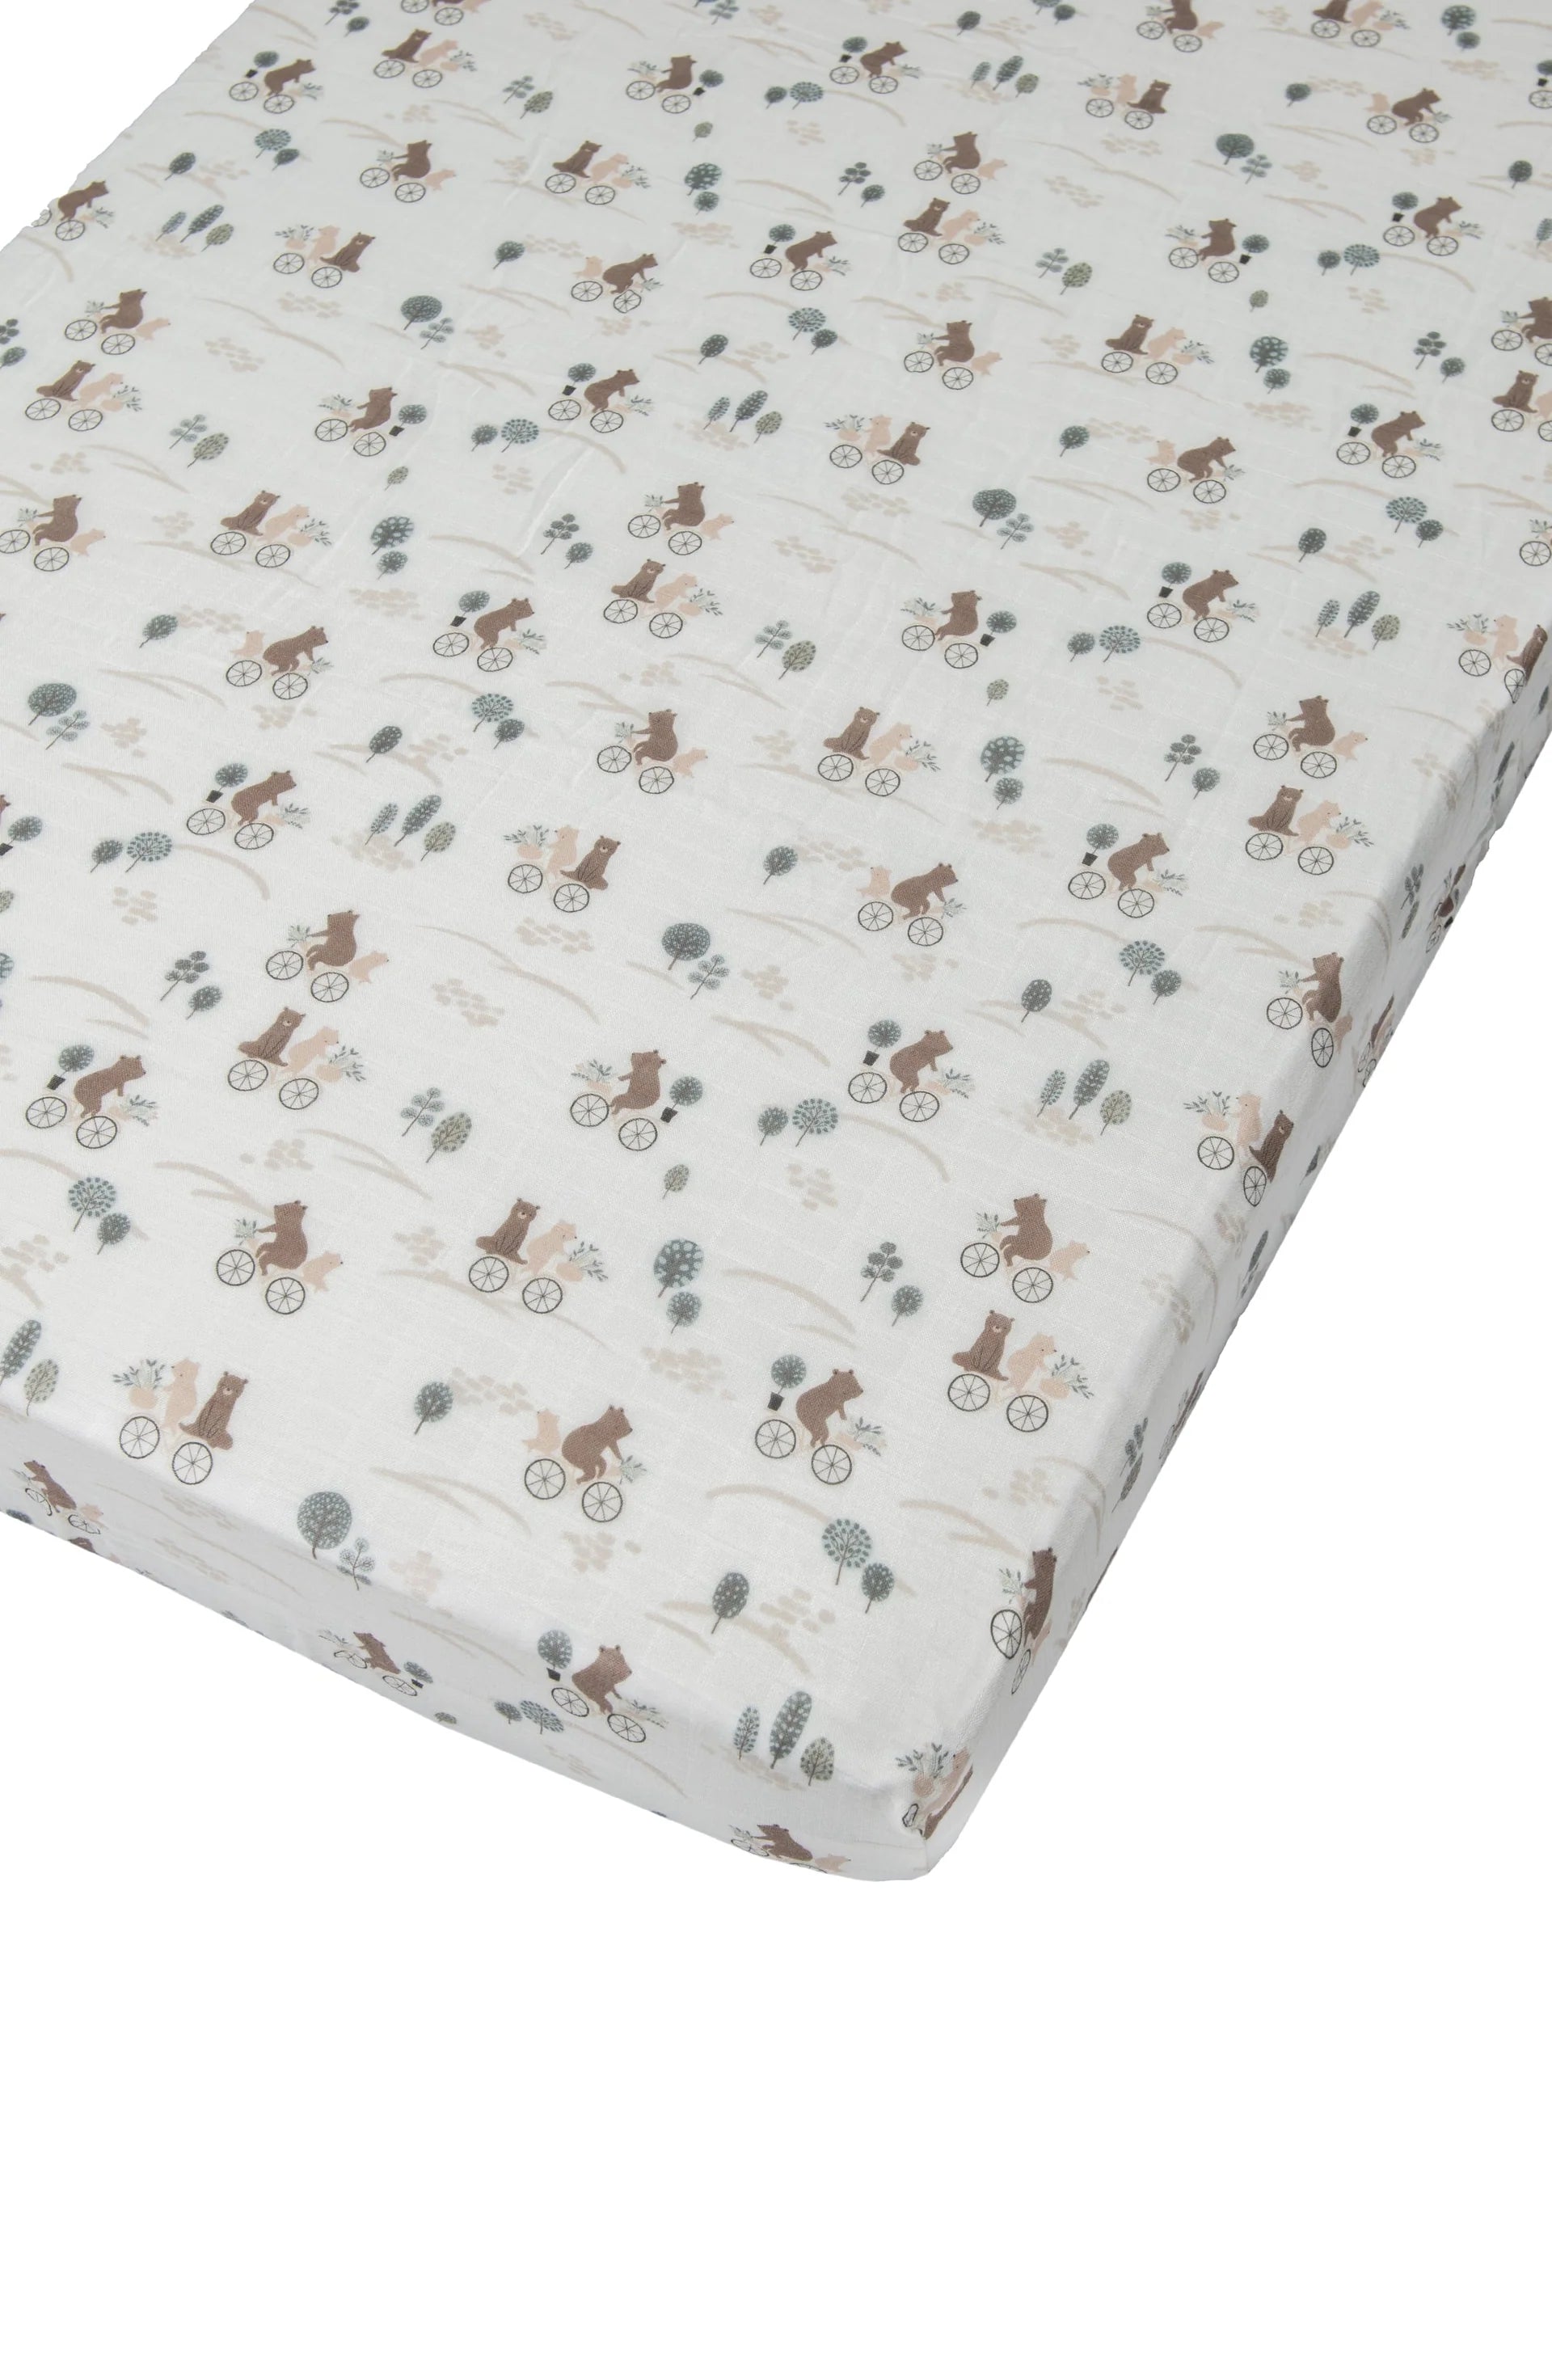 Loulou Lollipop Fitted Crib Sheet - Bears on Bikes